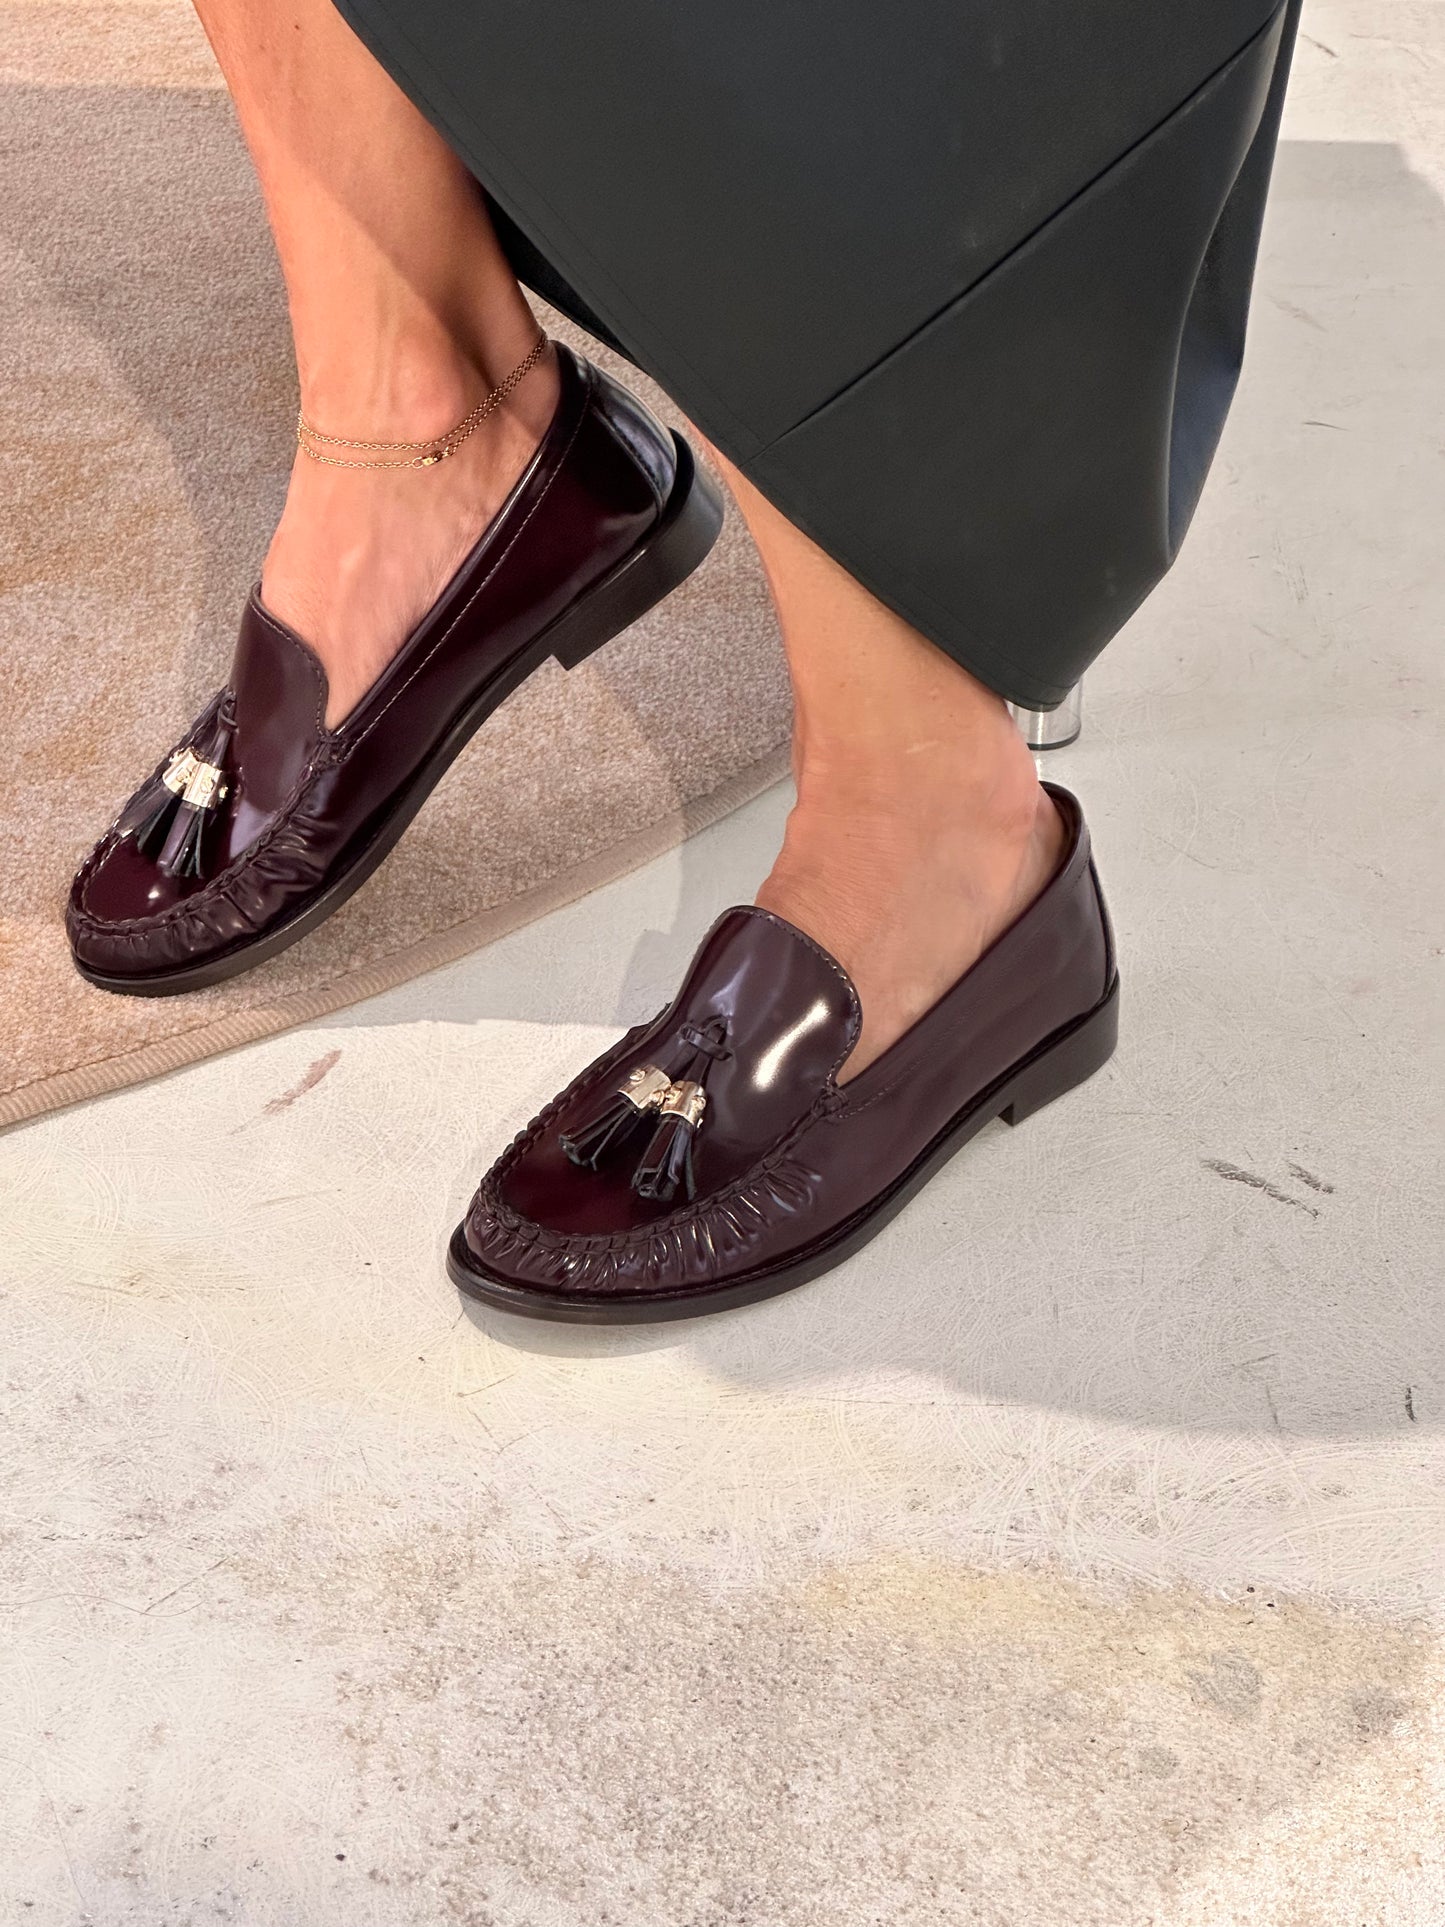 Bordeaux Glossy Leather Moccasin